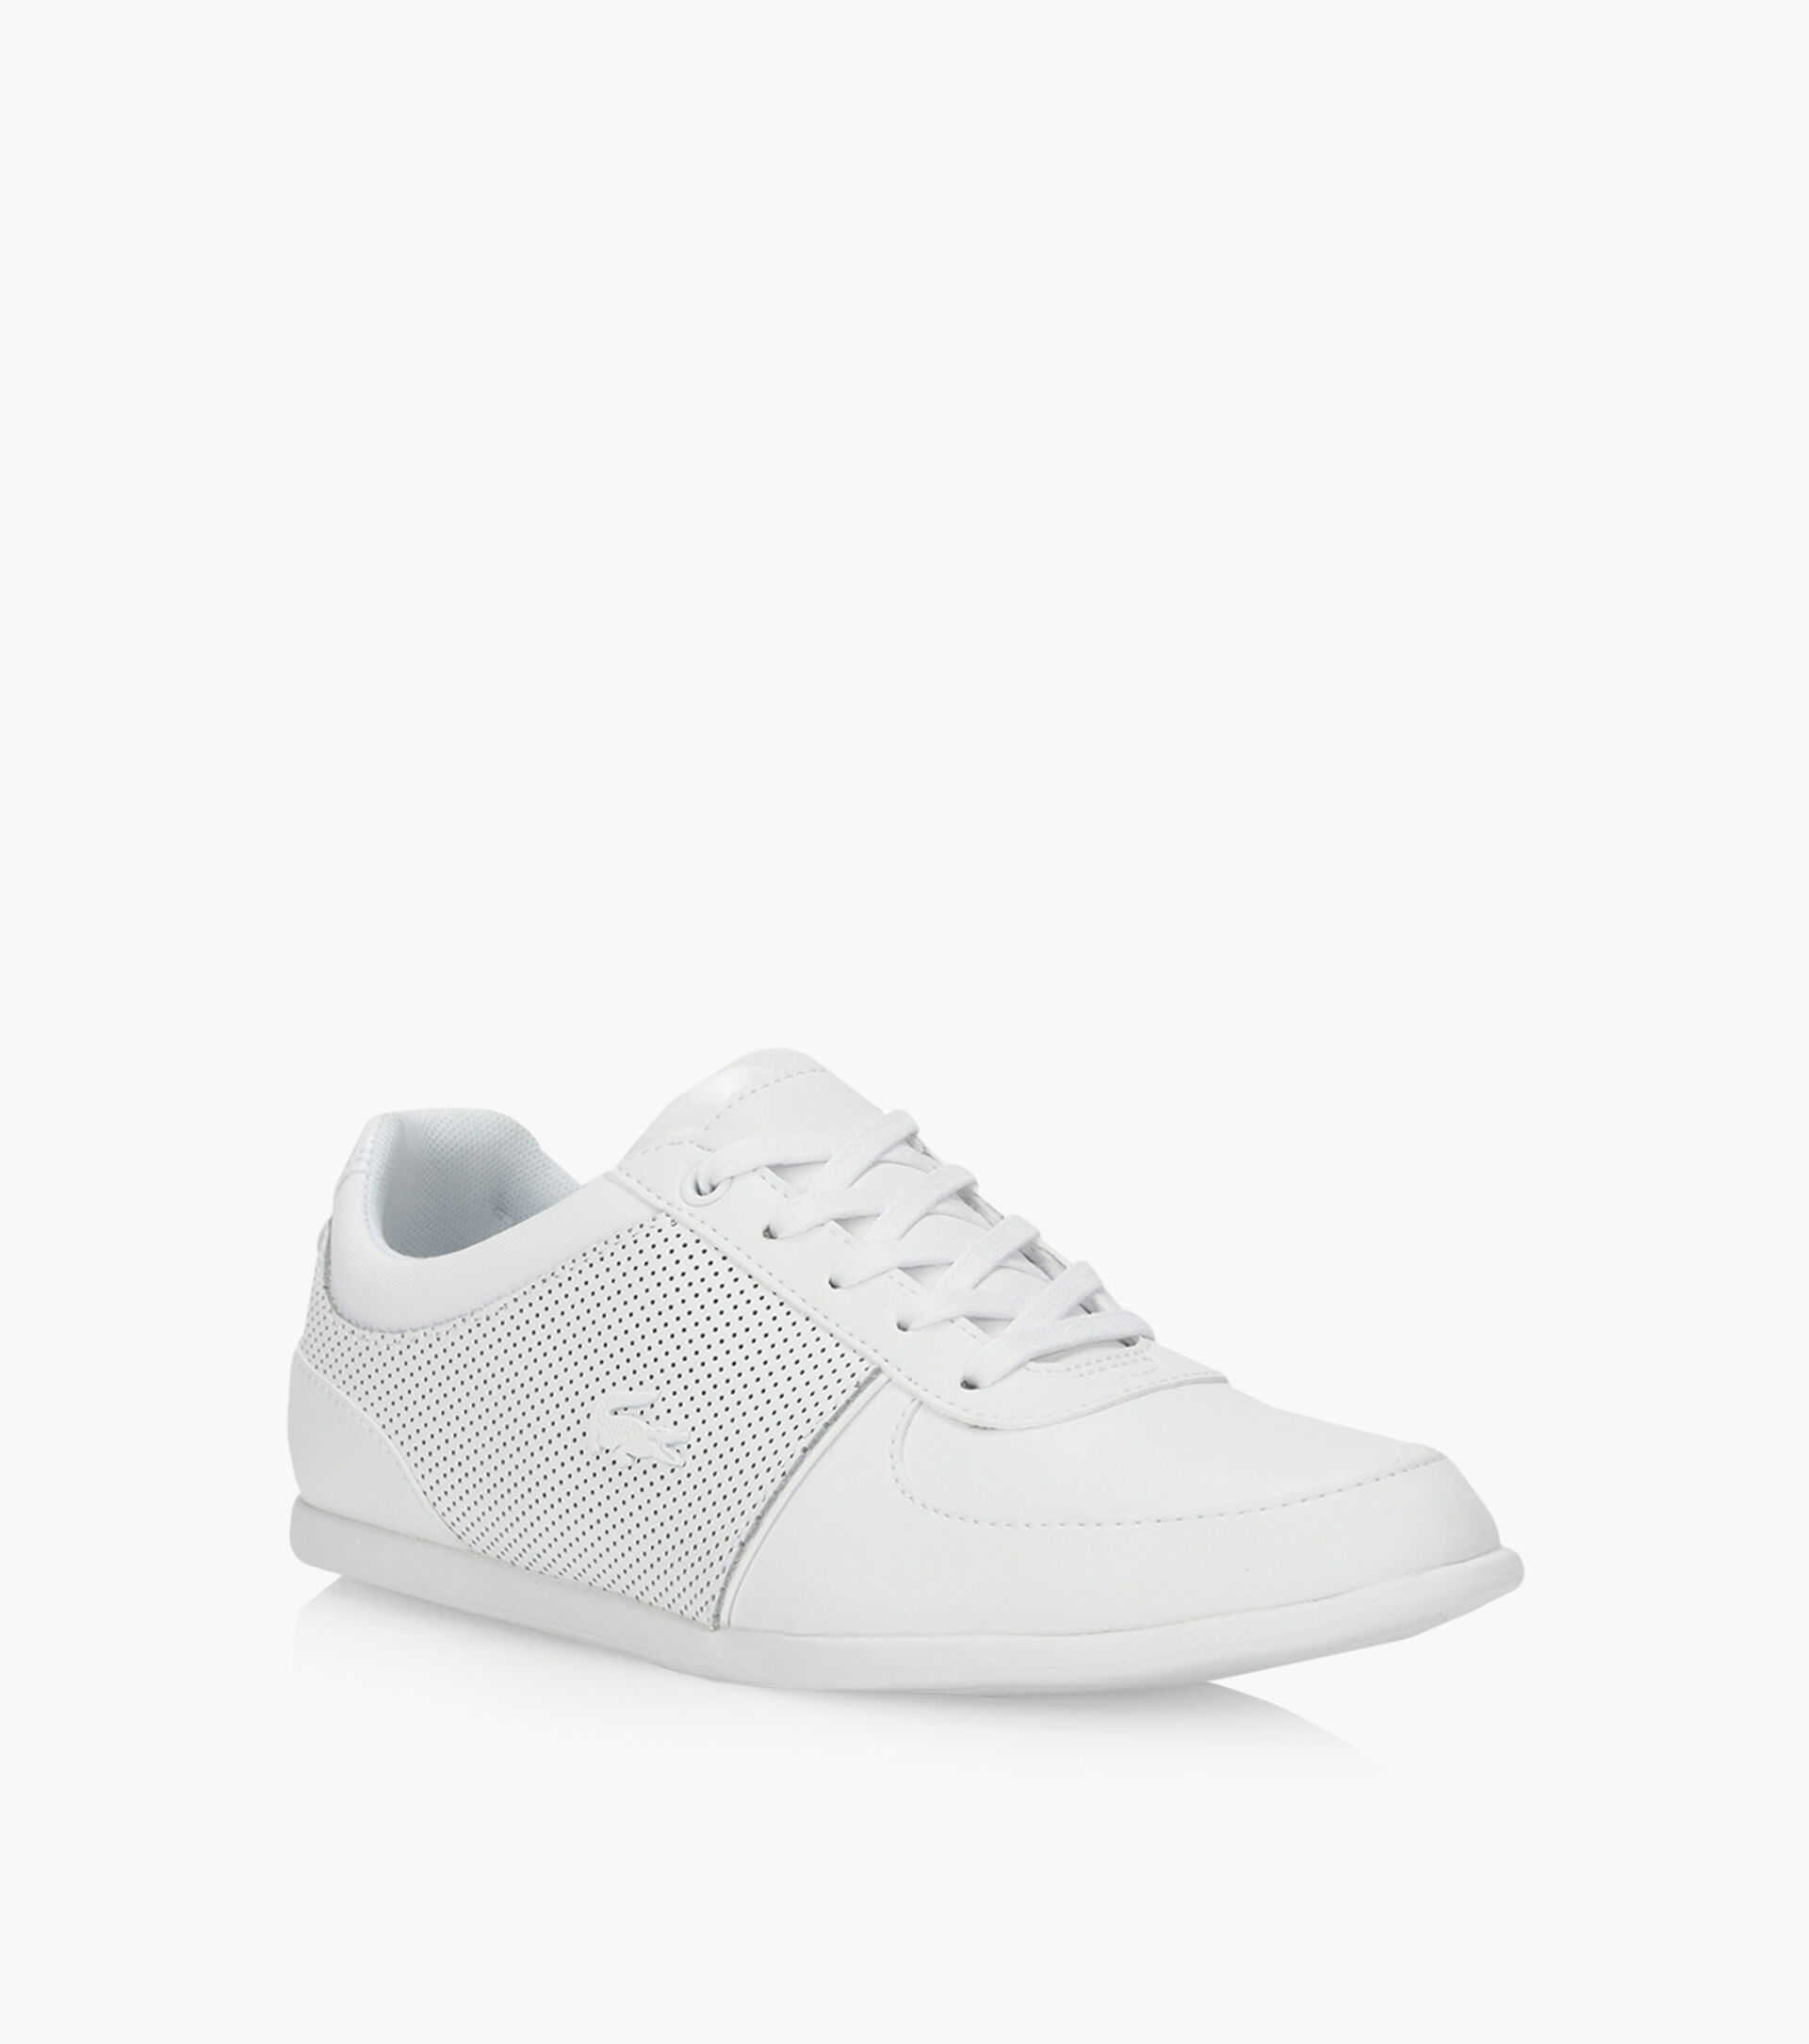 LACOSTE REY SPORT 120 2 - White Leather | Browns Shoes